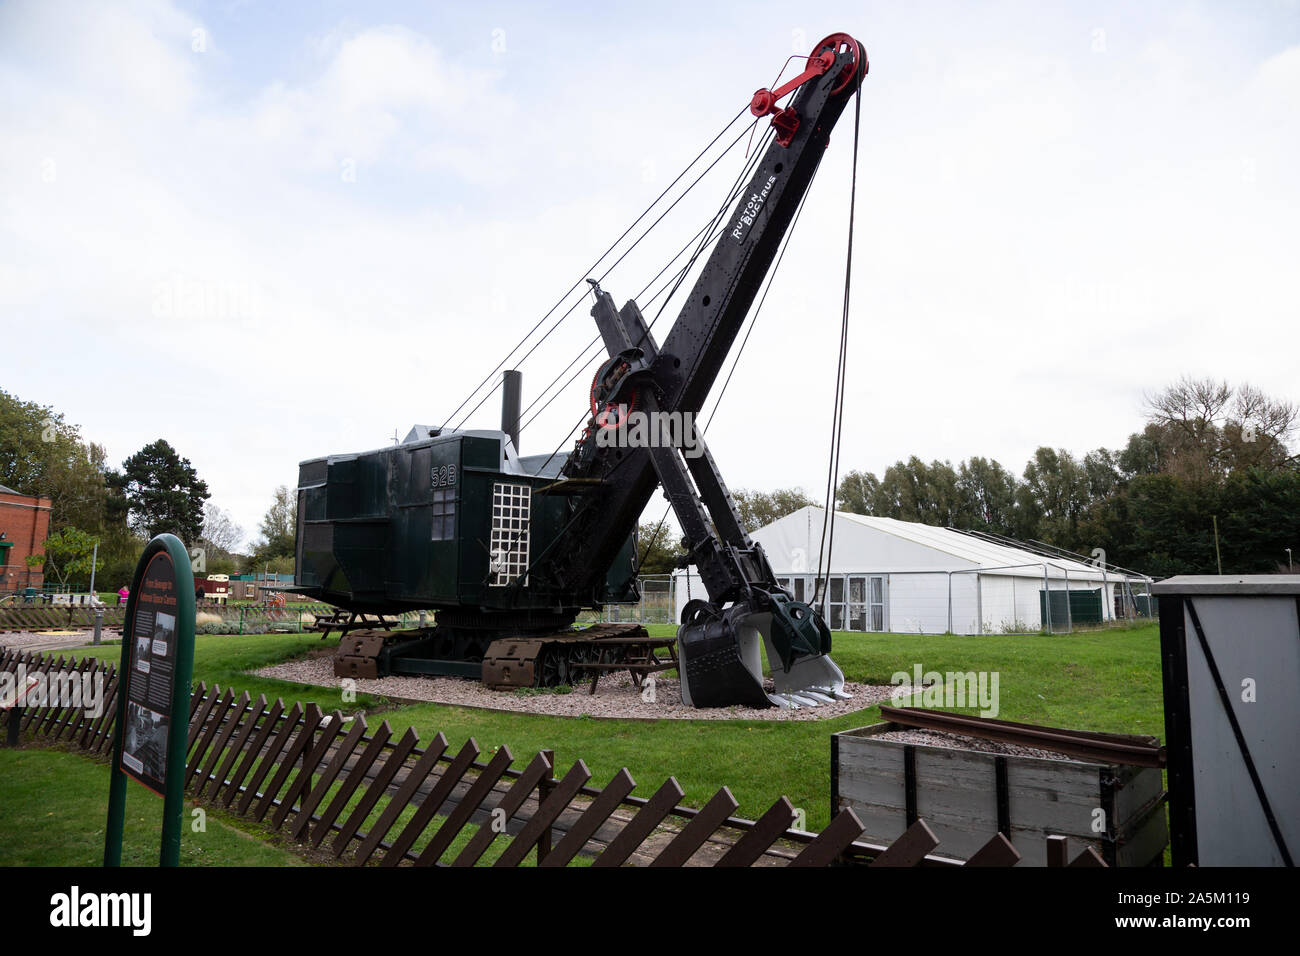 Static exhibit of a Ruston Bucyrus 52B Steam Quarry shovel on display at Abbey Pumping Station, Leicester Stock Photo